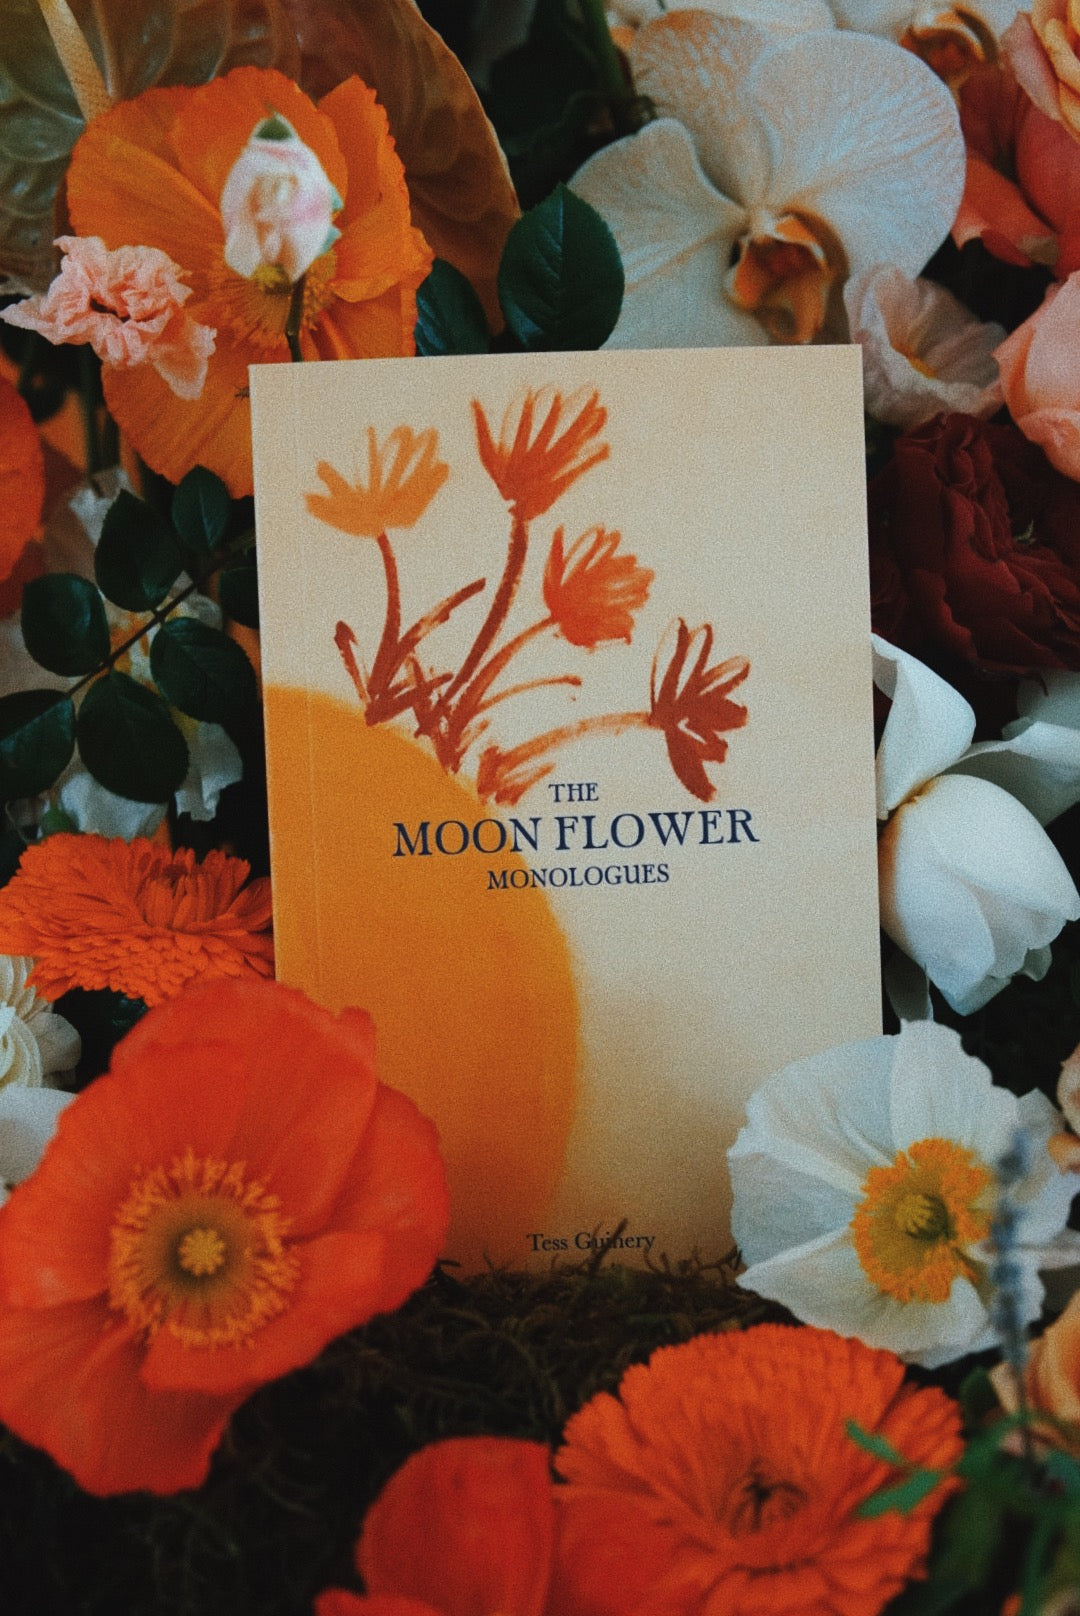 The Moonflower Monologues